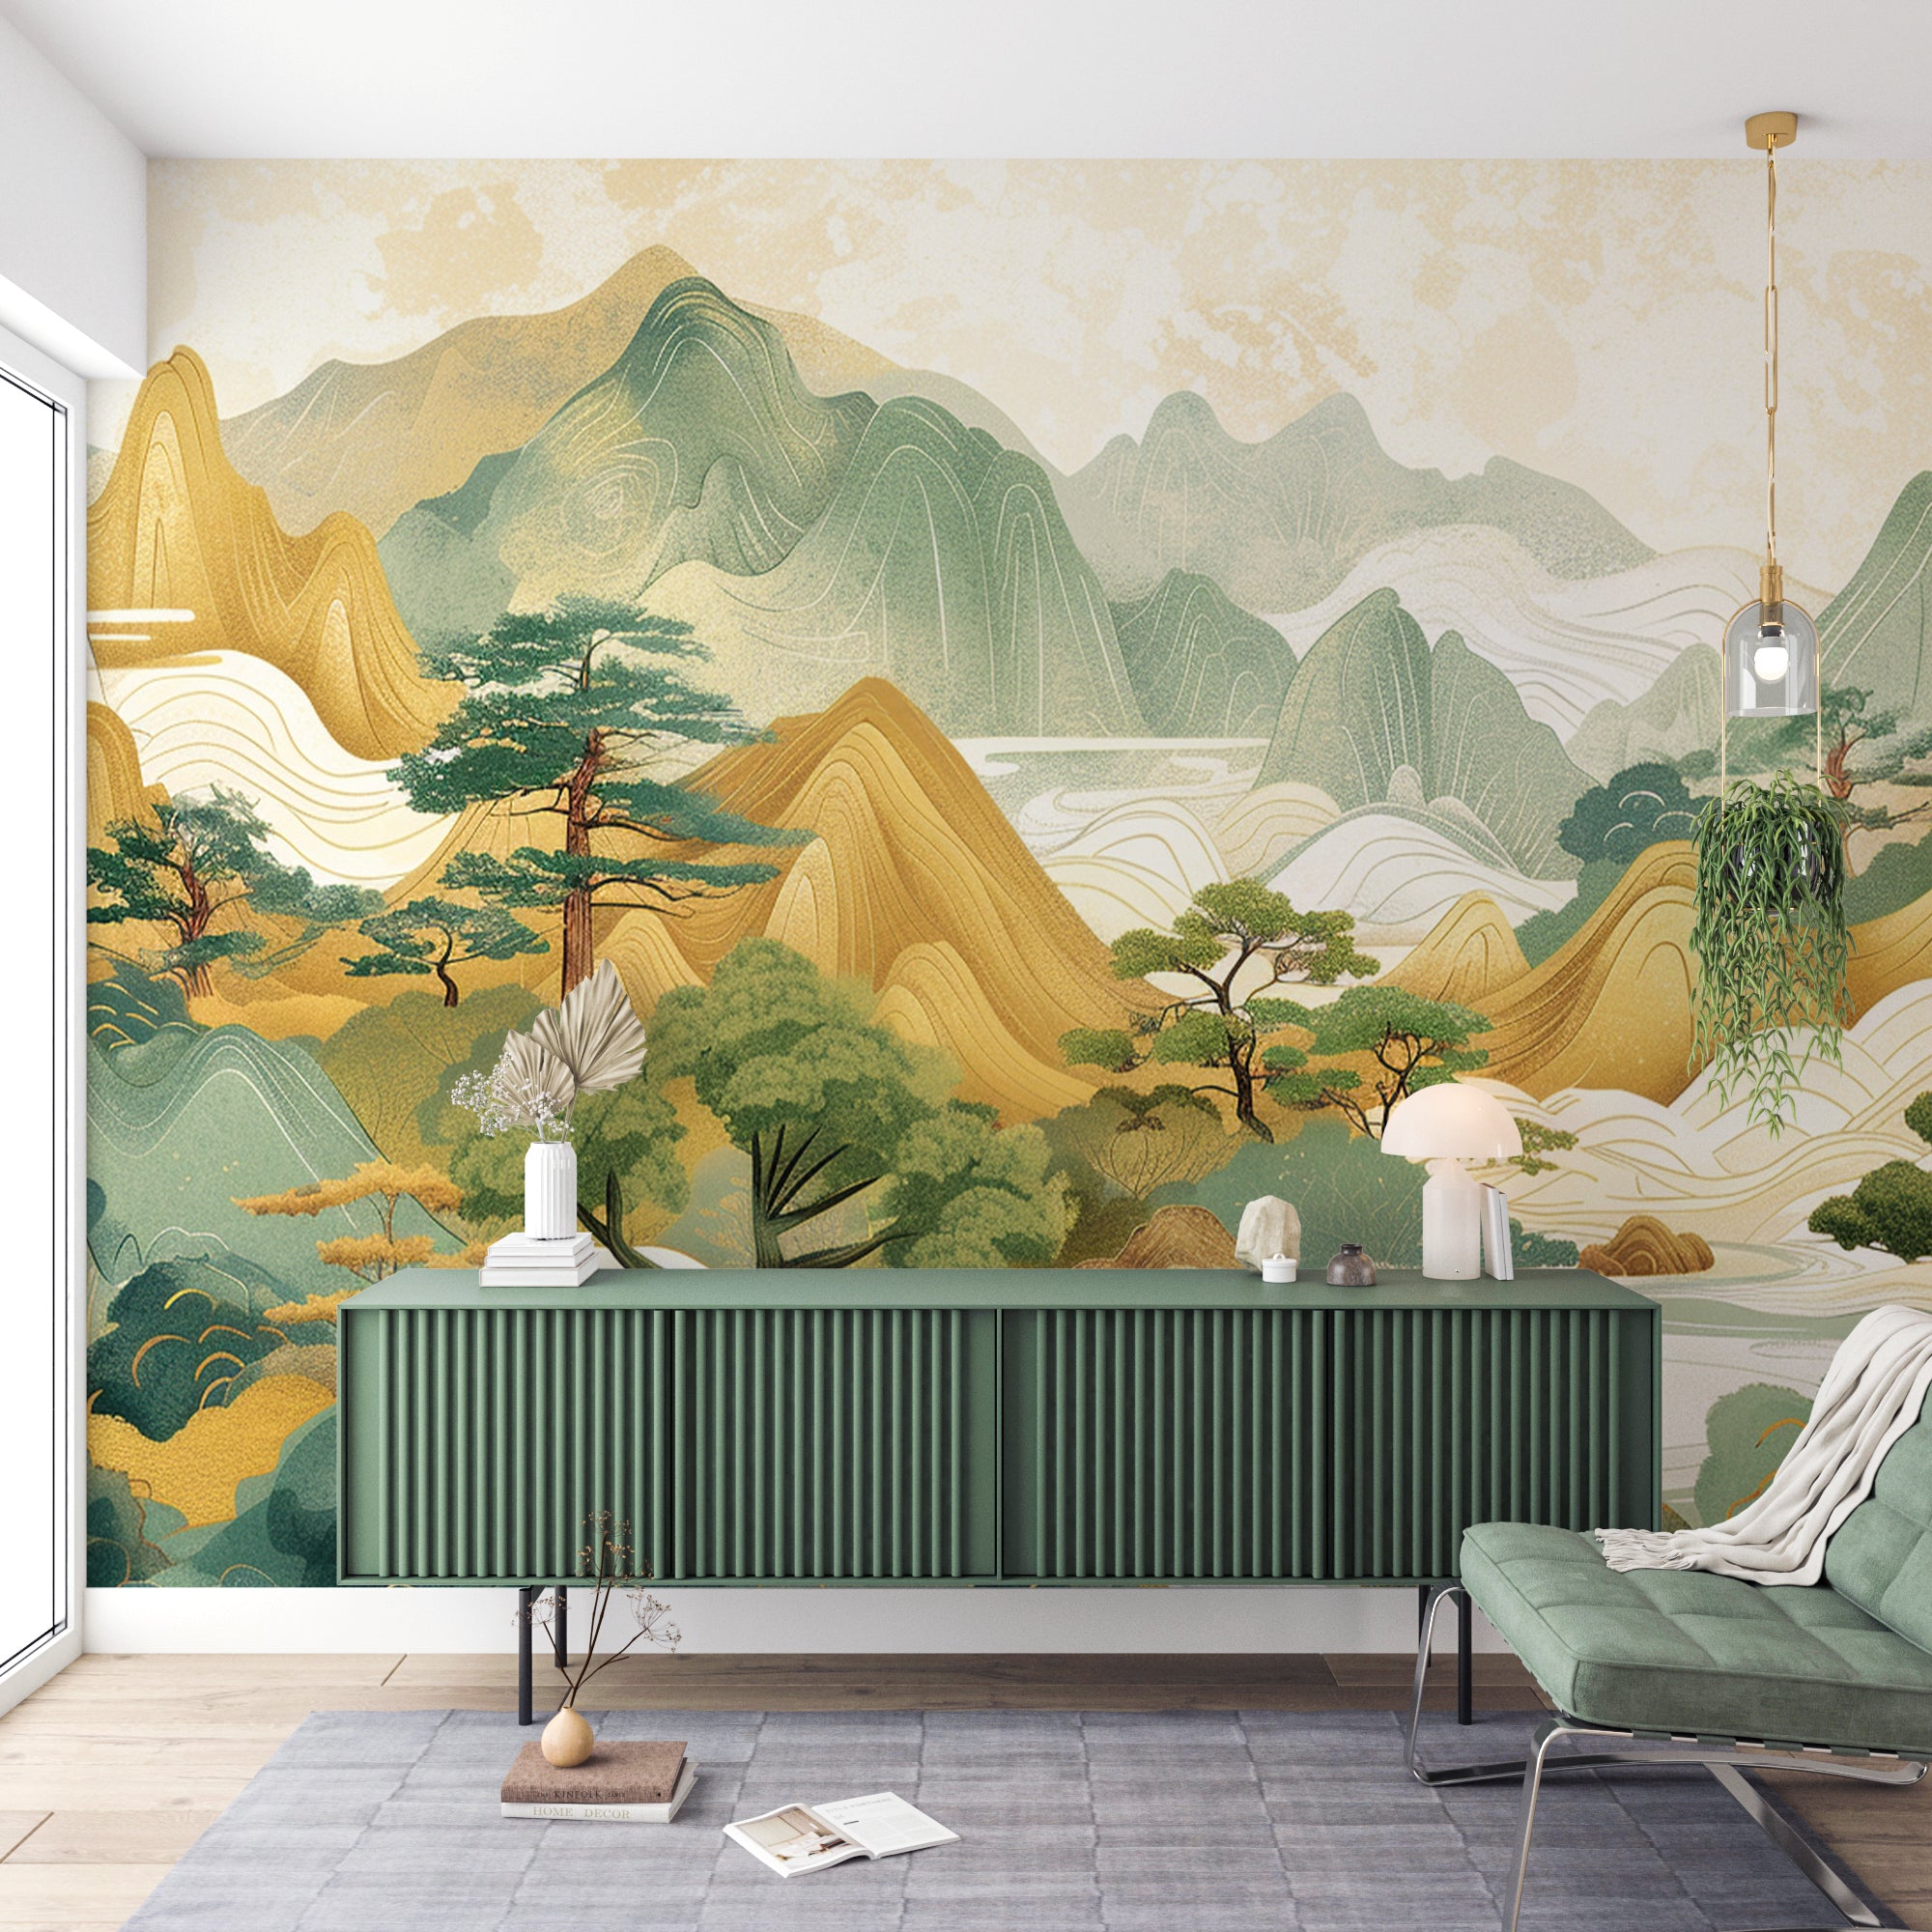 Tranquility of Asia: Wall Panorama of Enchanted Hills